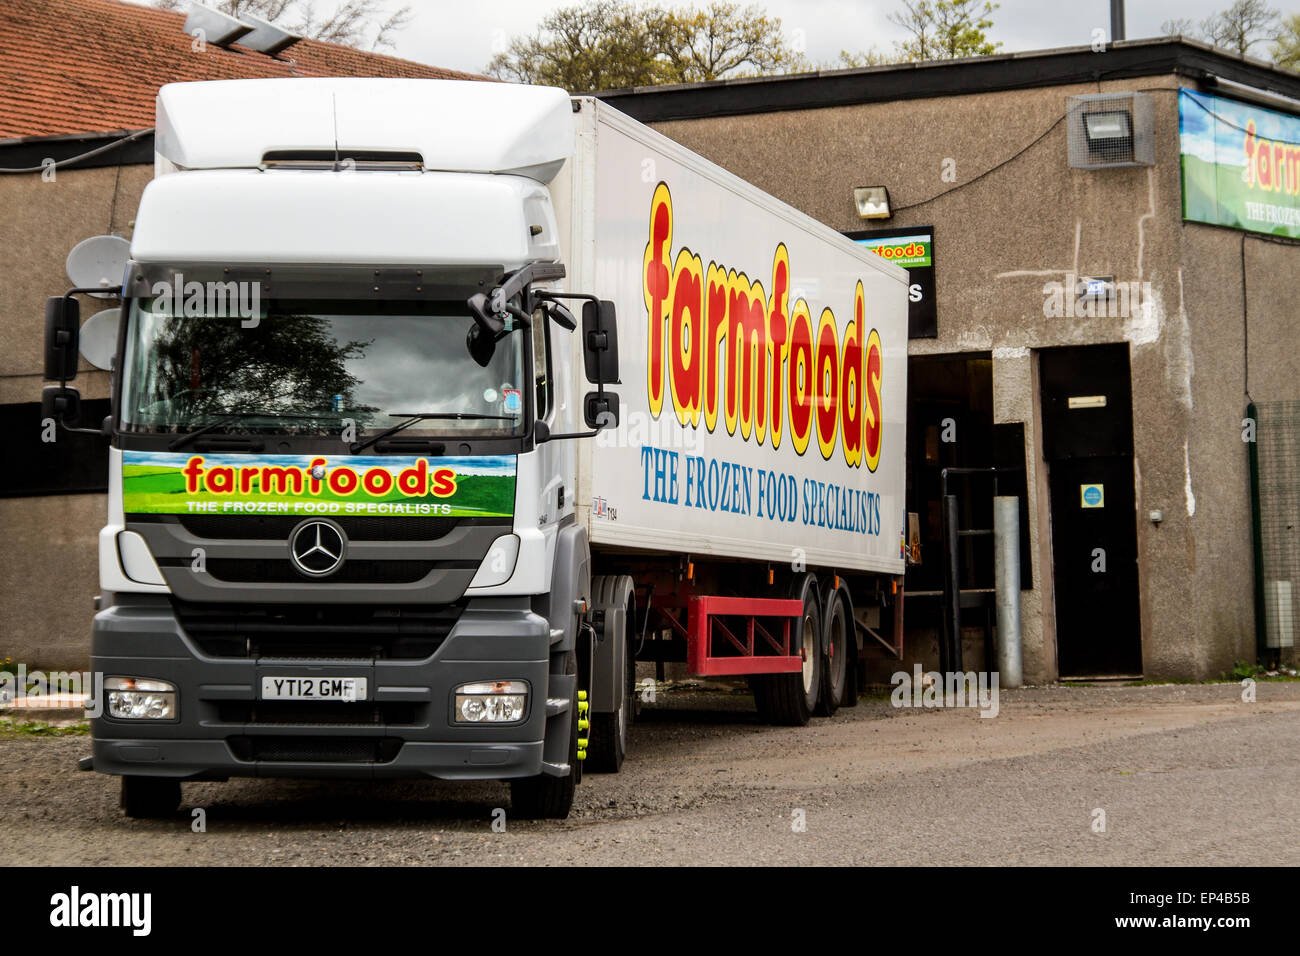 Farmfoods articulated Lorry delivering products to their small Farmfoods Retail Store along MacAlpine Road in Dundee, UK Stock Photo